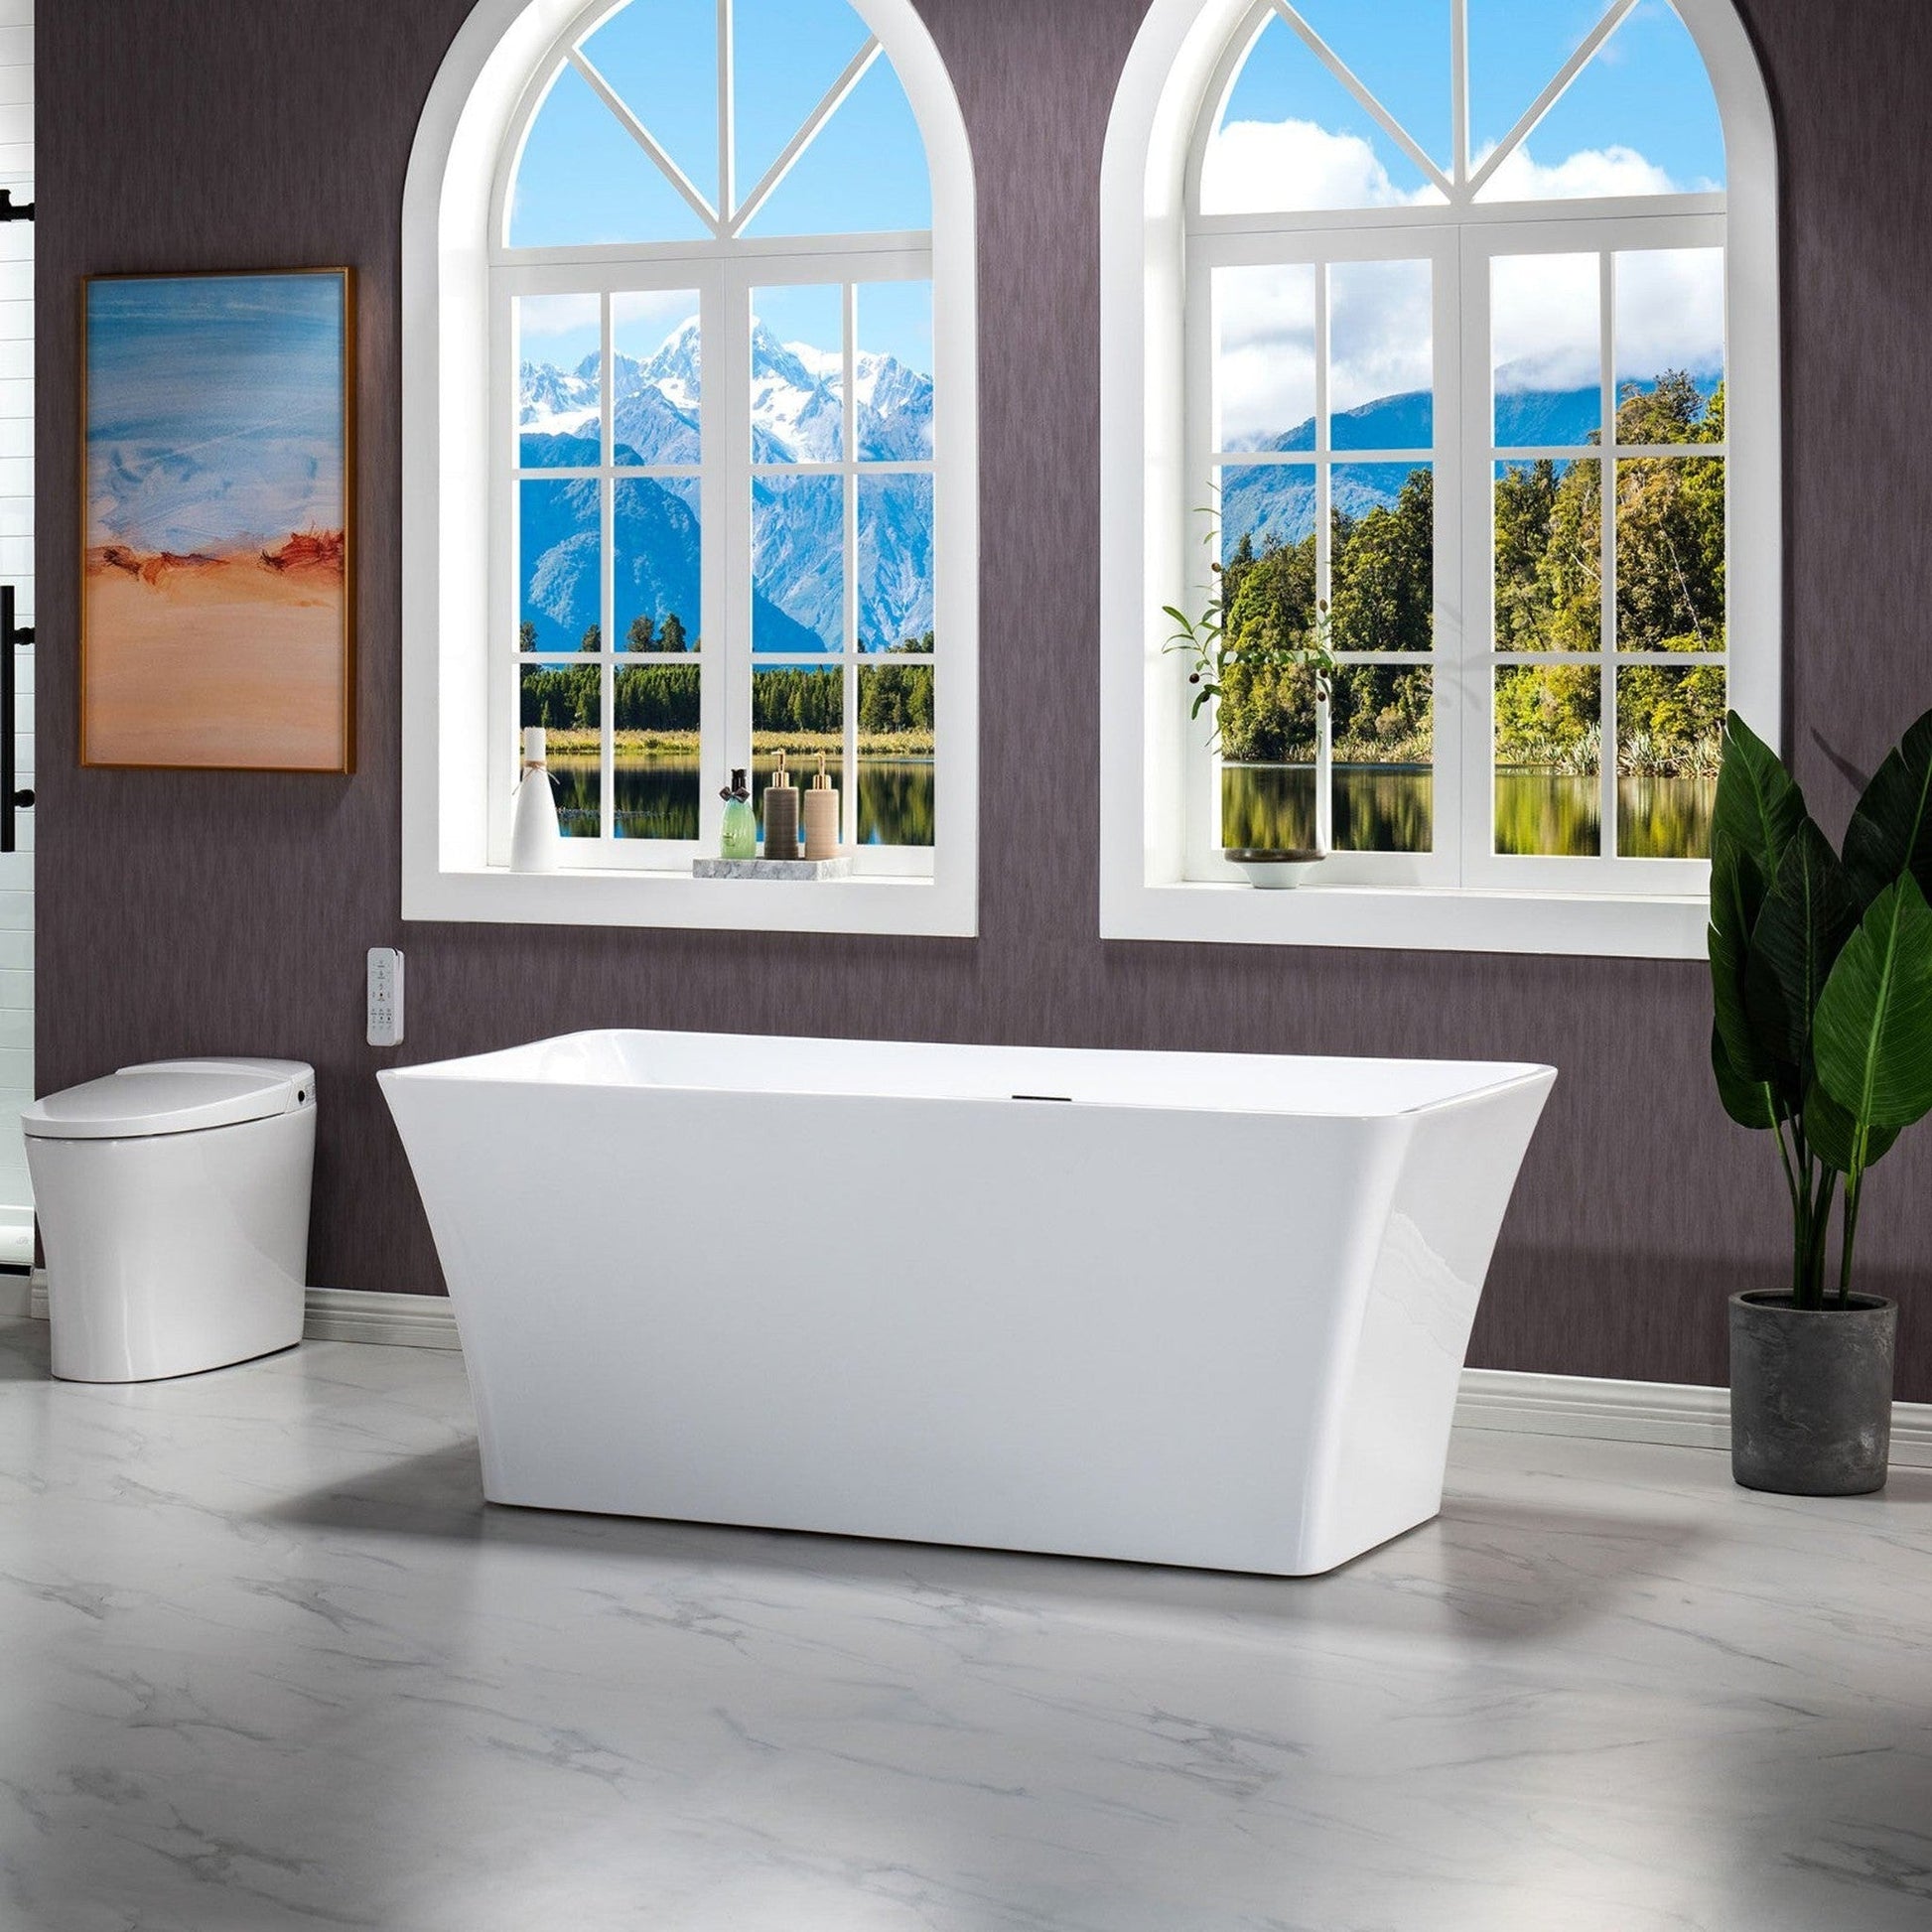 WoodBridge B-1509 59" White Acrylic Freestanding Soakng Bathtub With Brushed Nickel Drain, Overflow, F0070BNVT Tub Filler and Caddy Tray